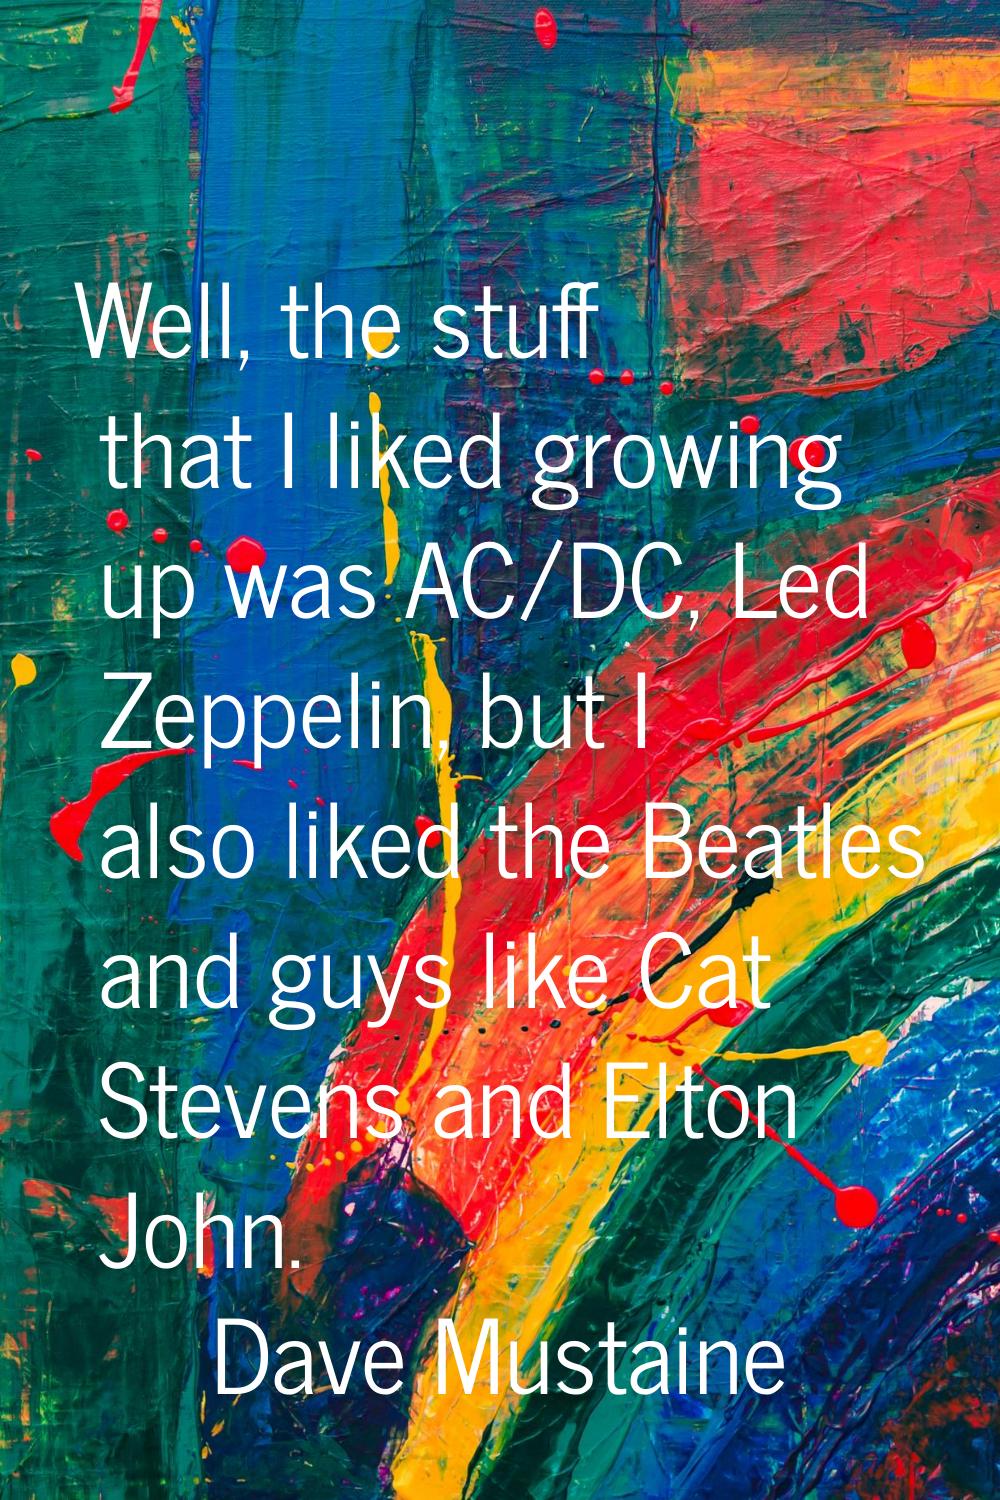 Well, the stuff that I liked growing up was AC/DC, Led Zeppelin, but I also liked the Beatles and g